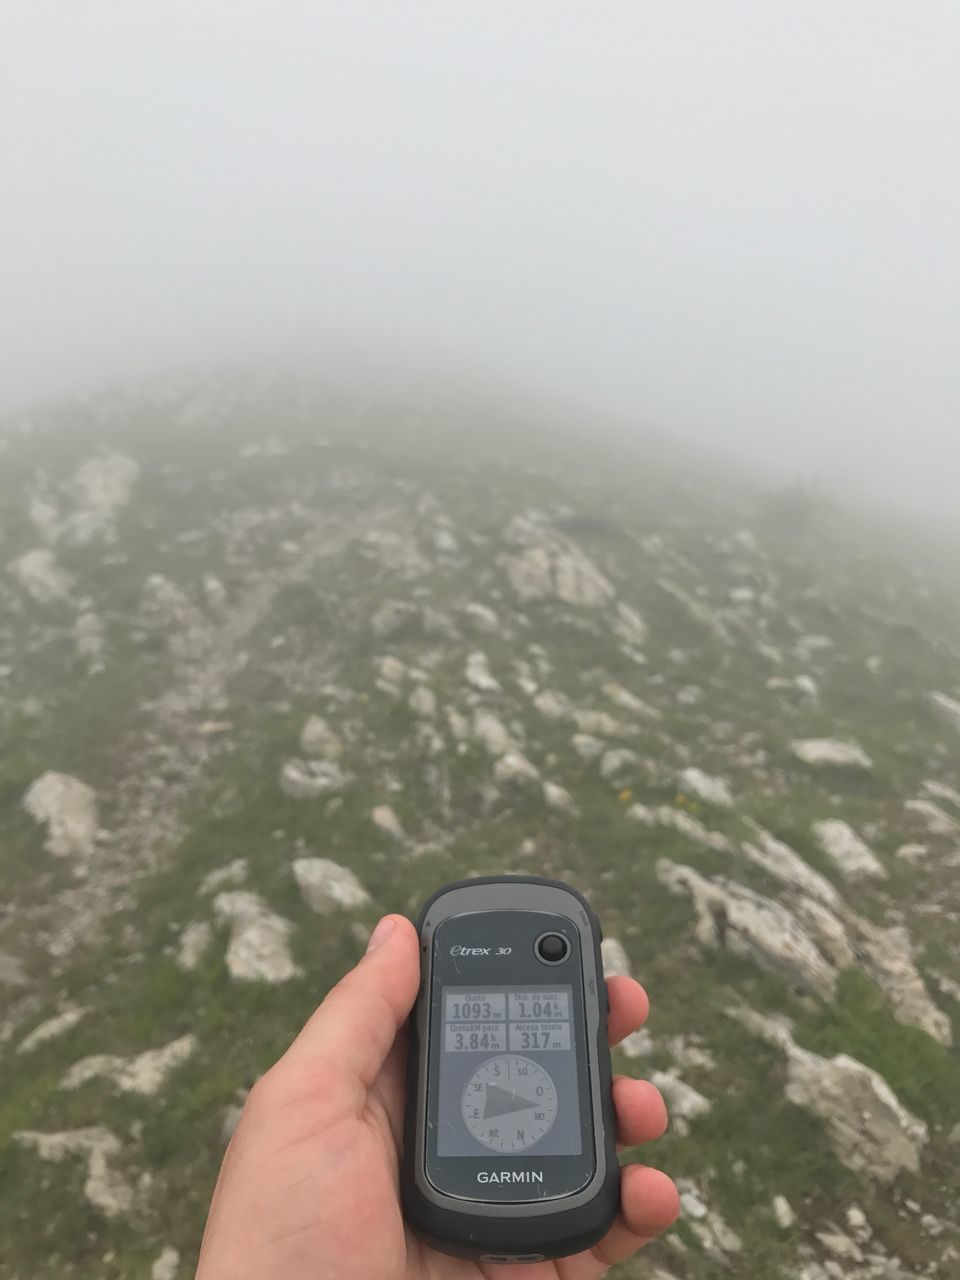 MIDSECTION OF PERSON HOLDING MOBILE PHONE AGAINST MOUNTAINS